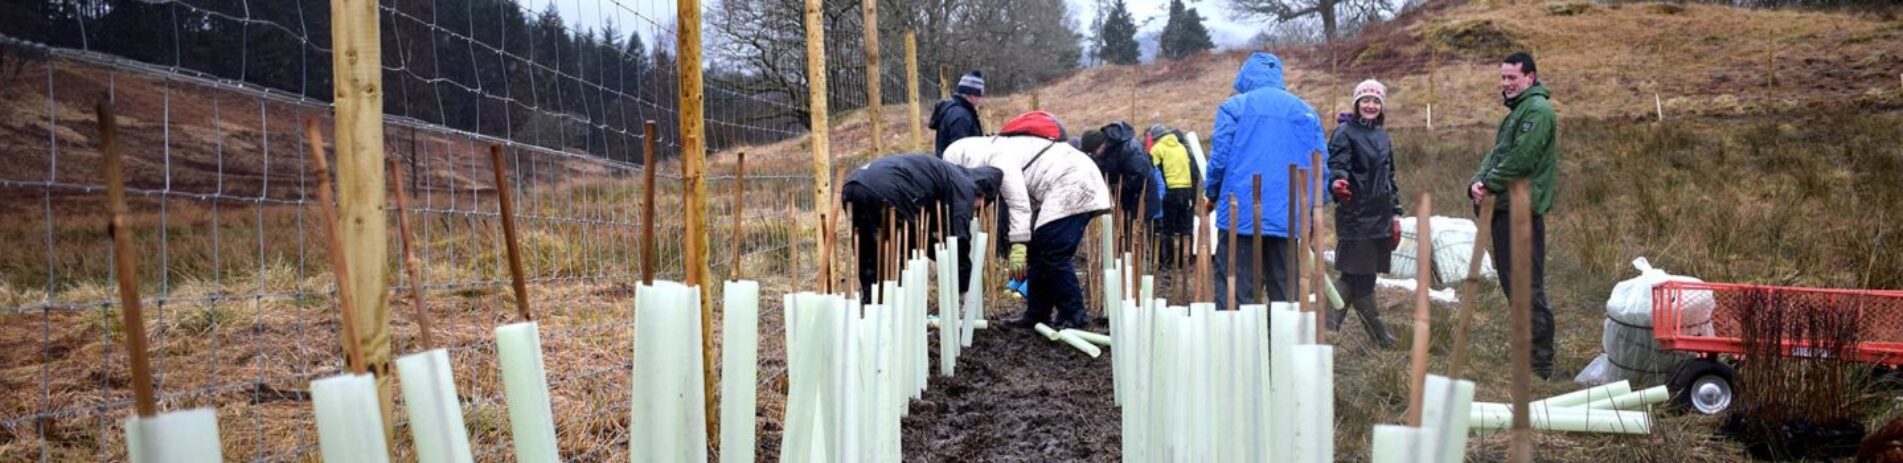 children-teacher-and-national-park-staff-planting-trees-at-achray-farm-next-to-deer-fence-all-wearing-waterproofs-on-rainy-day